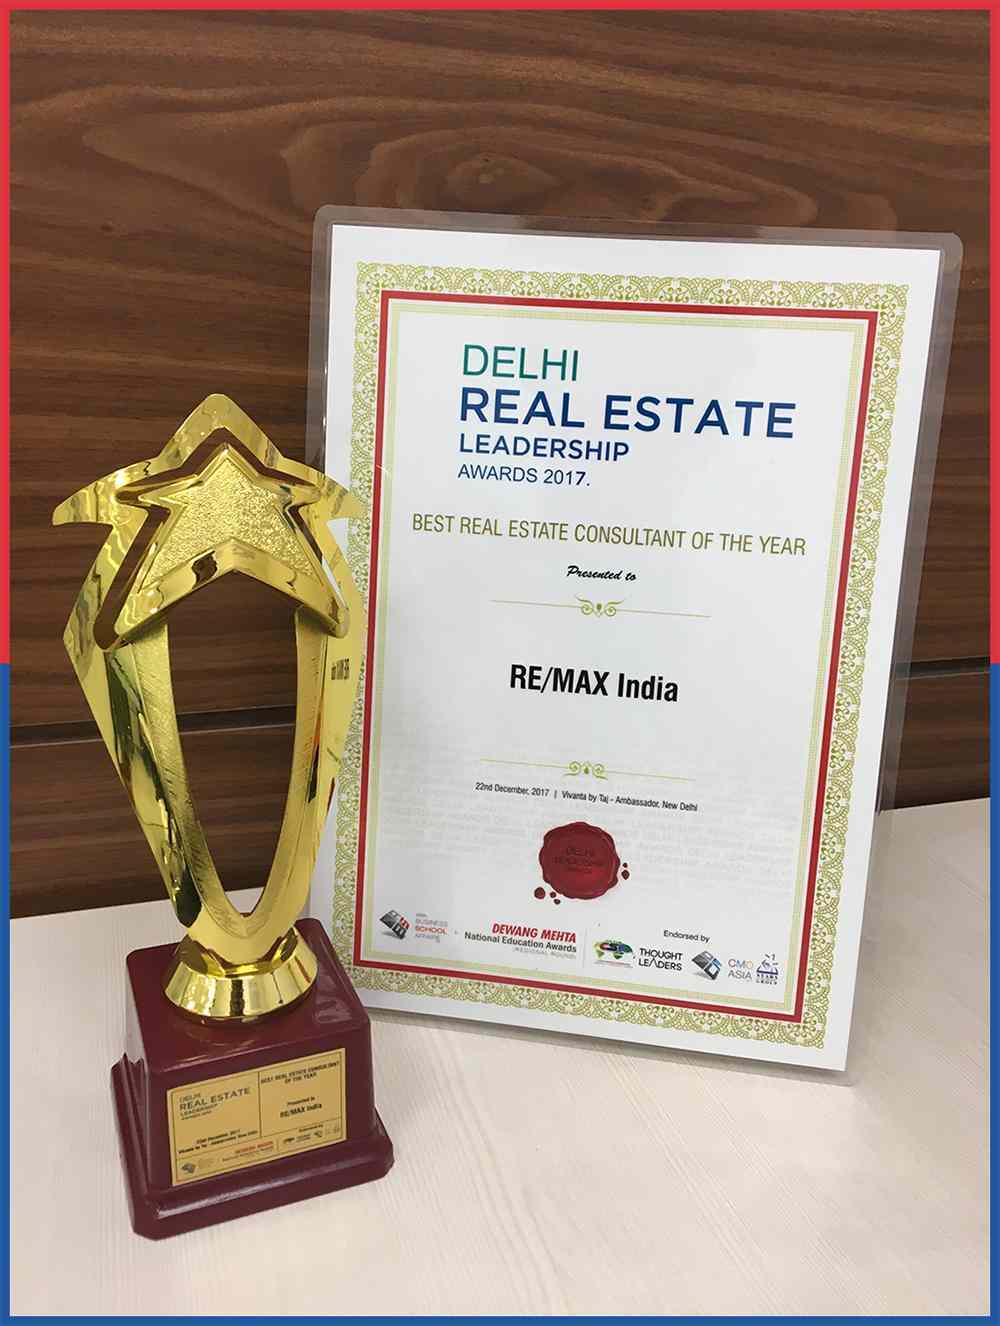 Remax India awarded The Best Real Estate Consultant of The Year by Delhi Leadership Awards 2017 Update